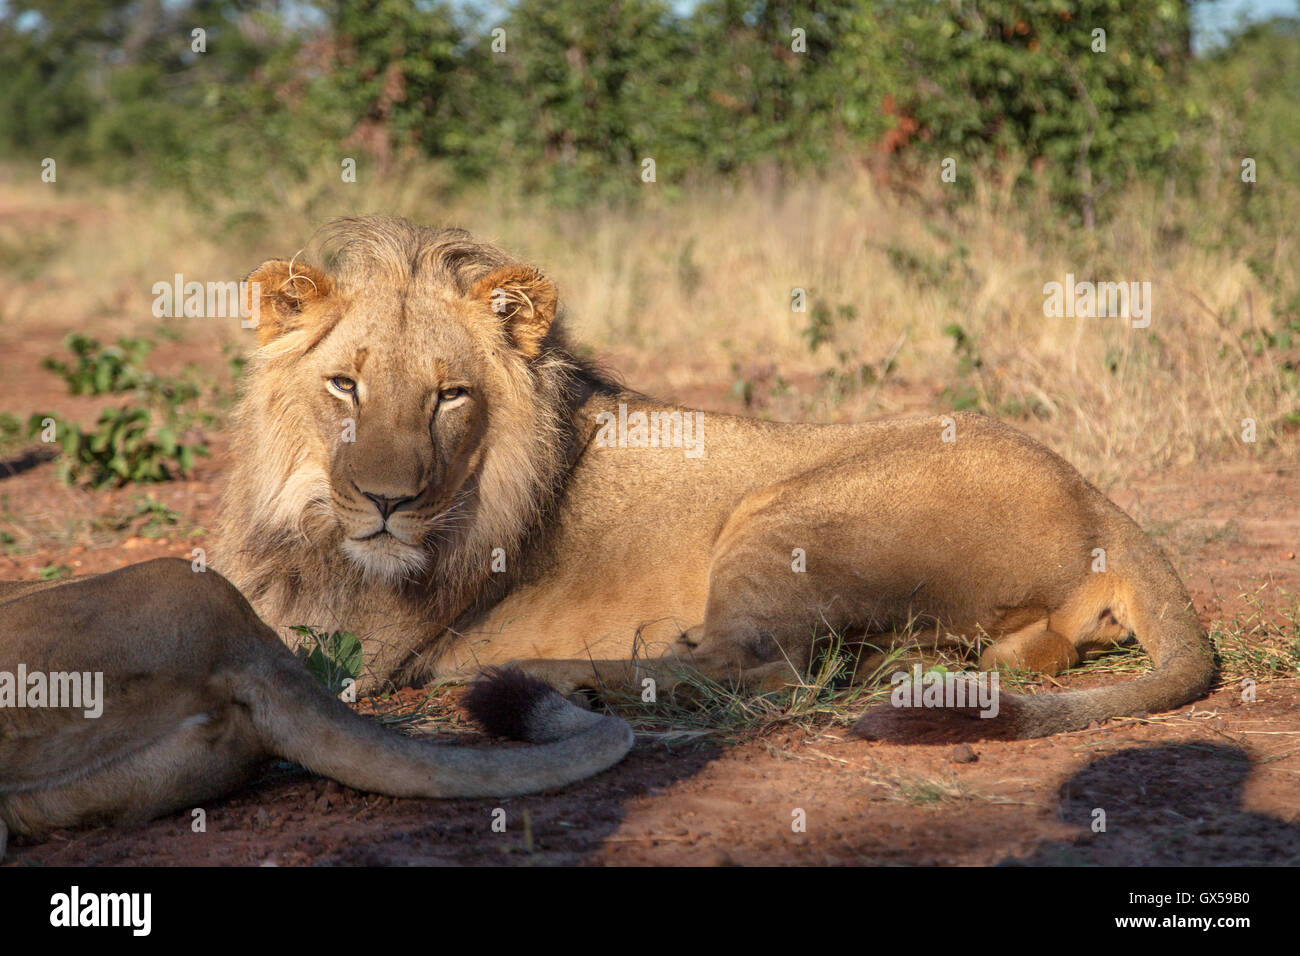 An adolescent male lion lying on the ground looking at camera in Victoria Falls, Zimbabwe. Stock Photo